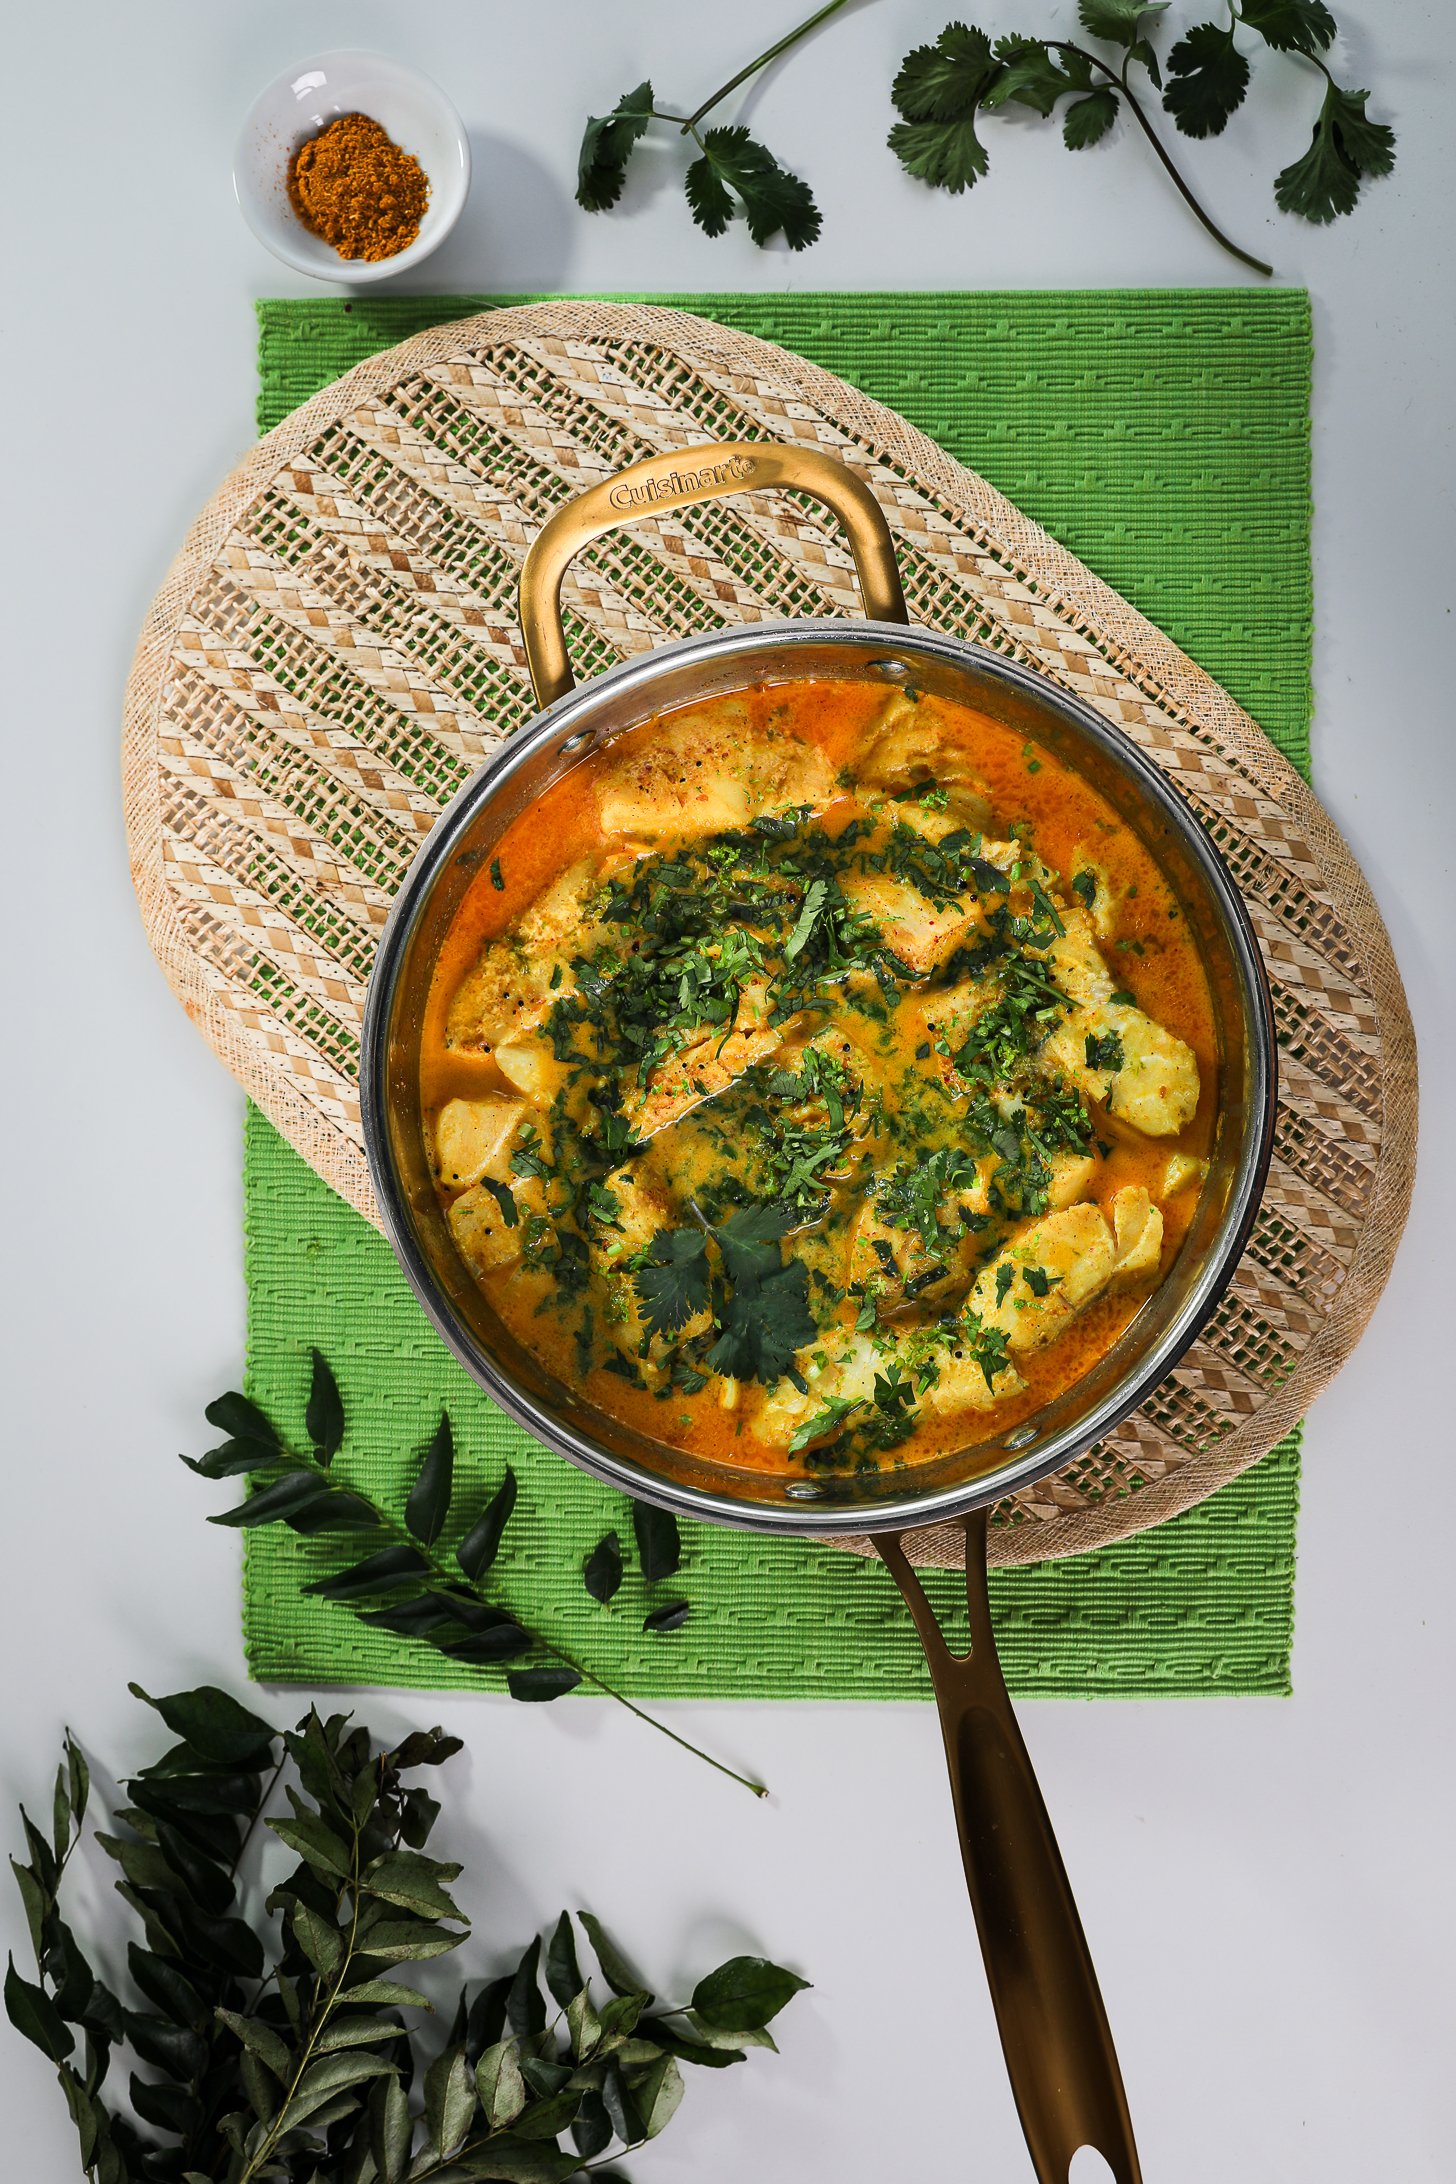 Bird's-eye view: Pan of fish fillets immersed in vibrant curry sauce, topped with chopped cilantro, elegantly styled with mats and curry leaves.